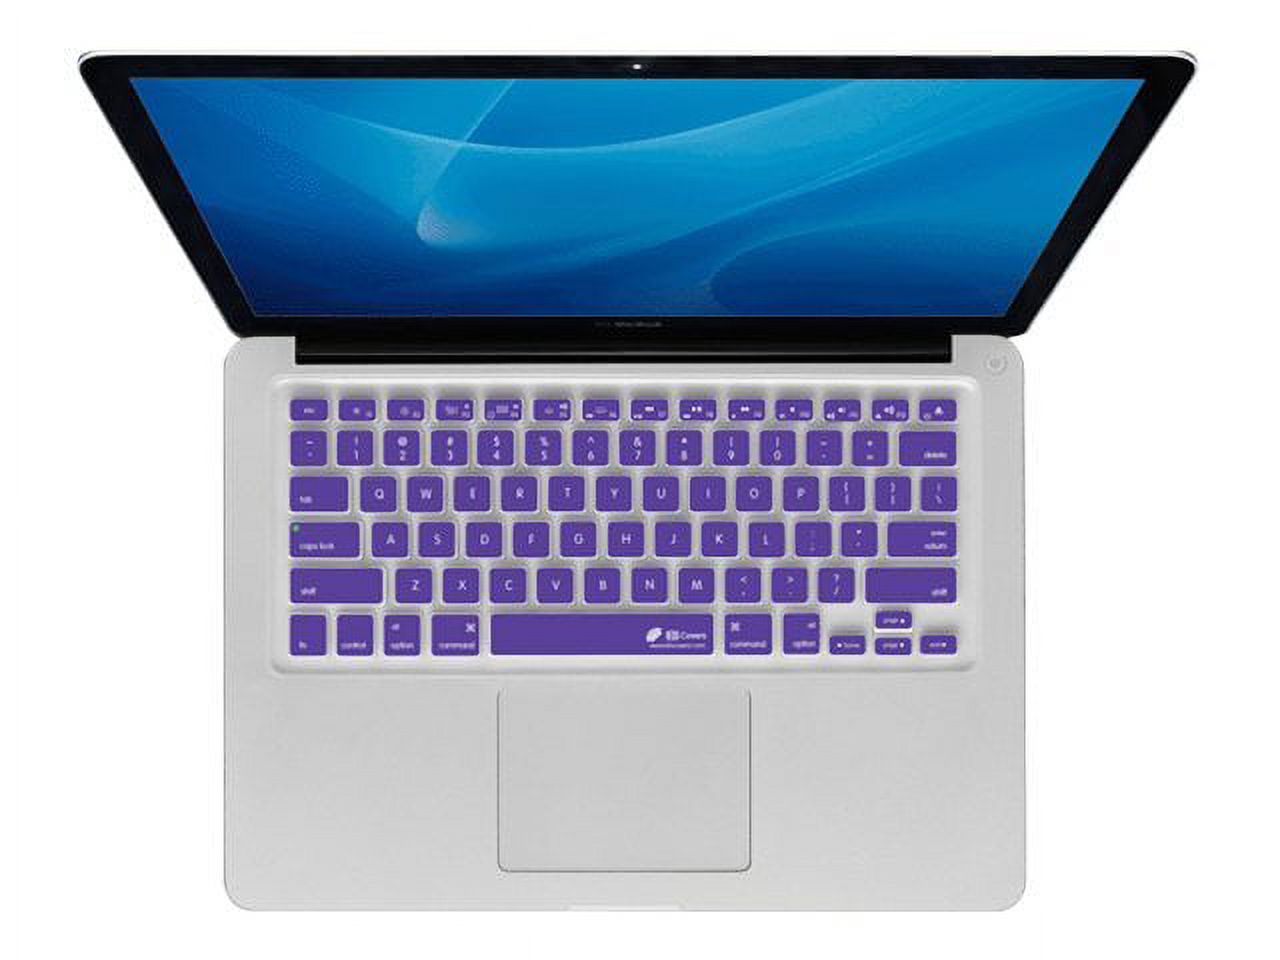 KB Covers Checkerboard Keyboard Cover CB-M-PURPLE - Notebook keyboard protector - purple, clear - image 1 of 2